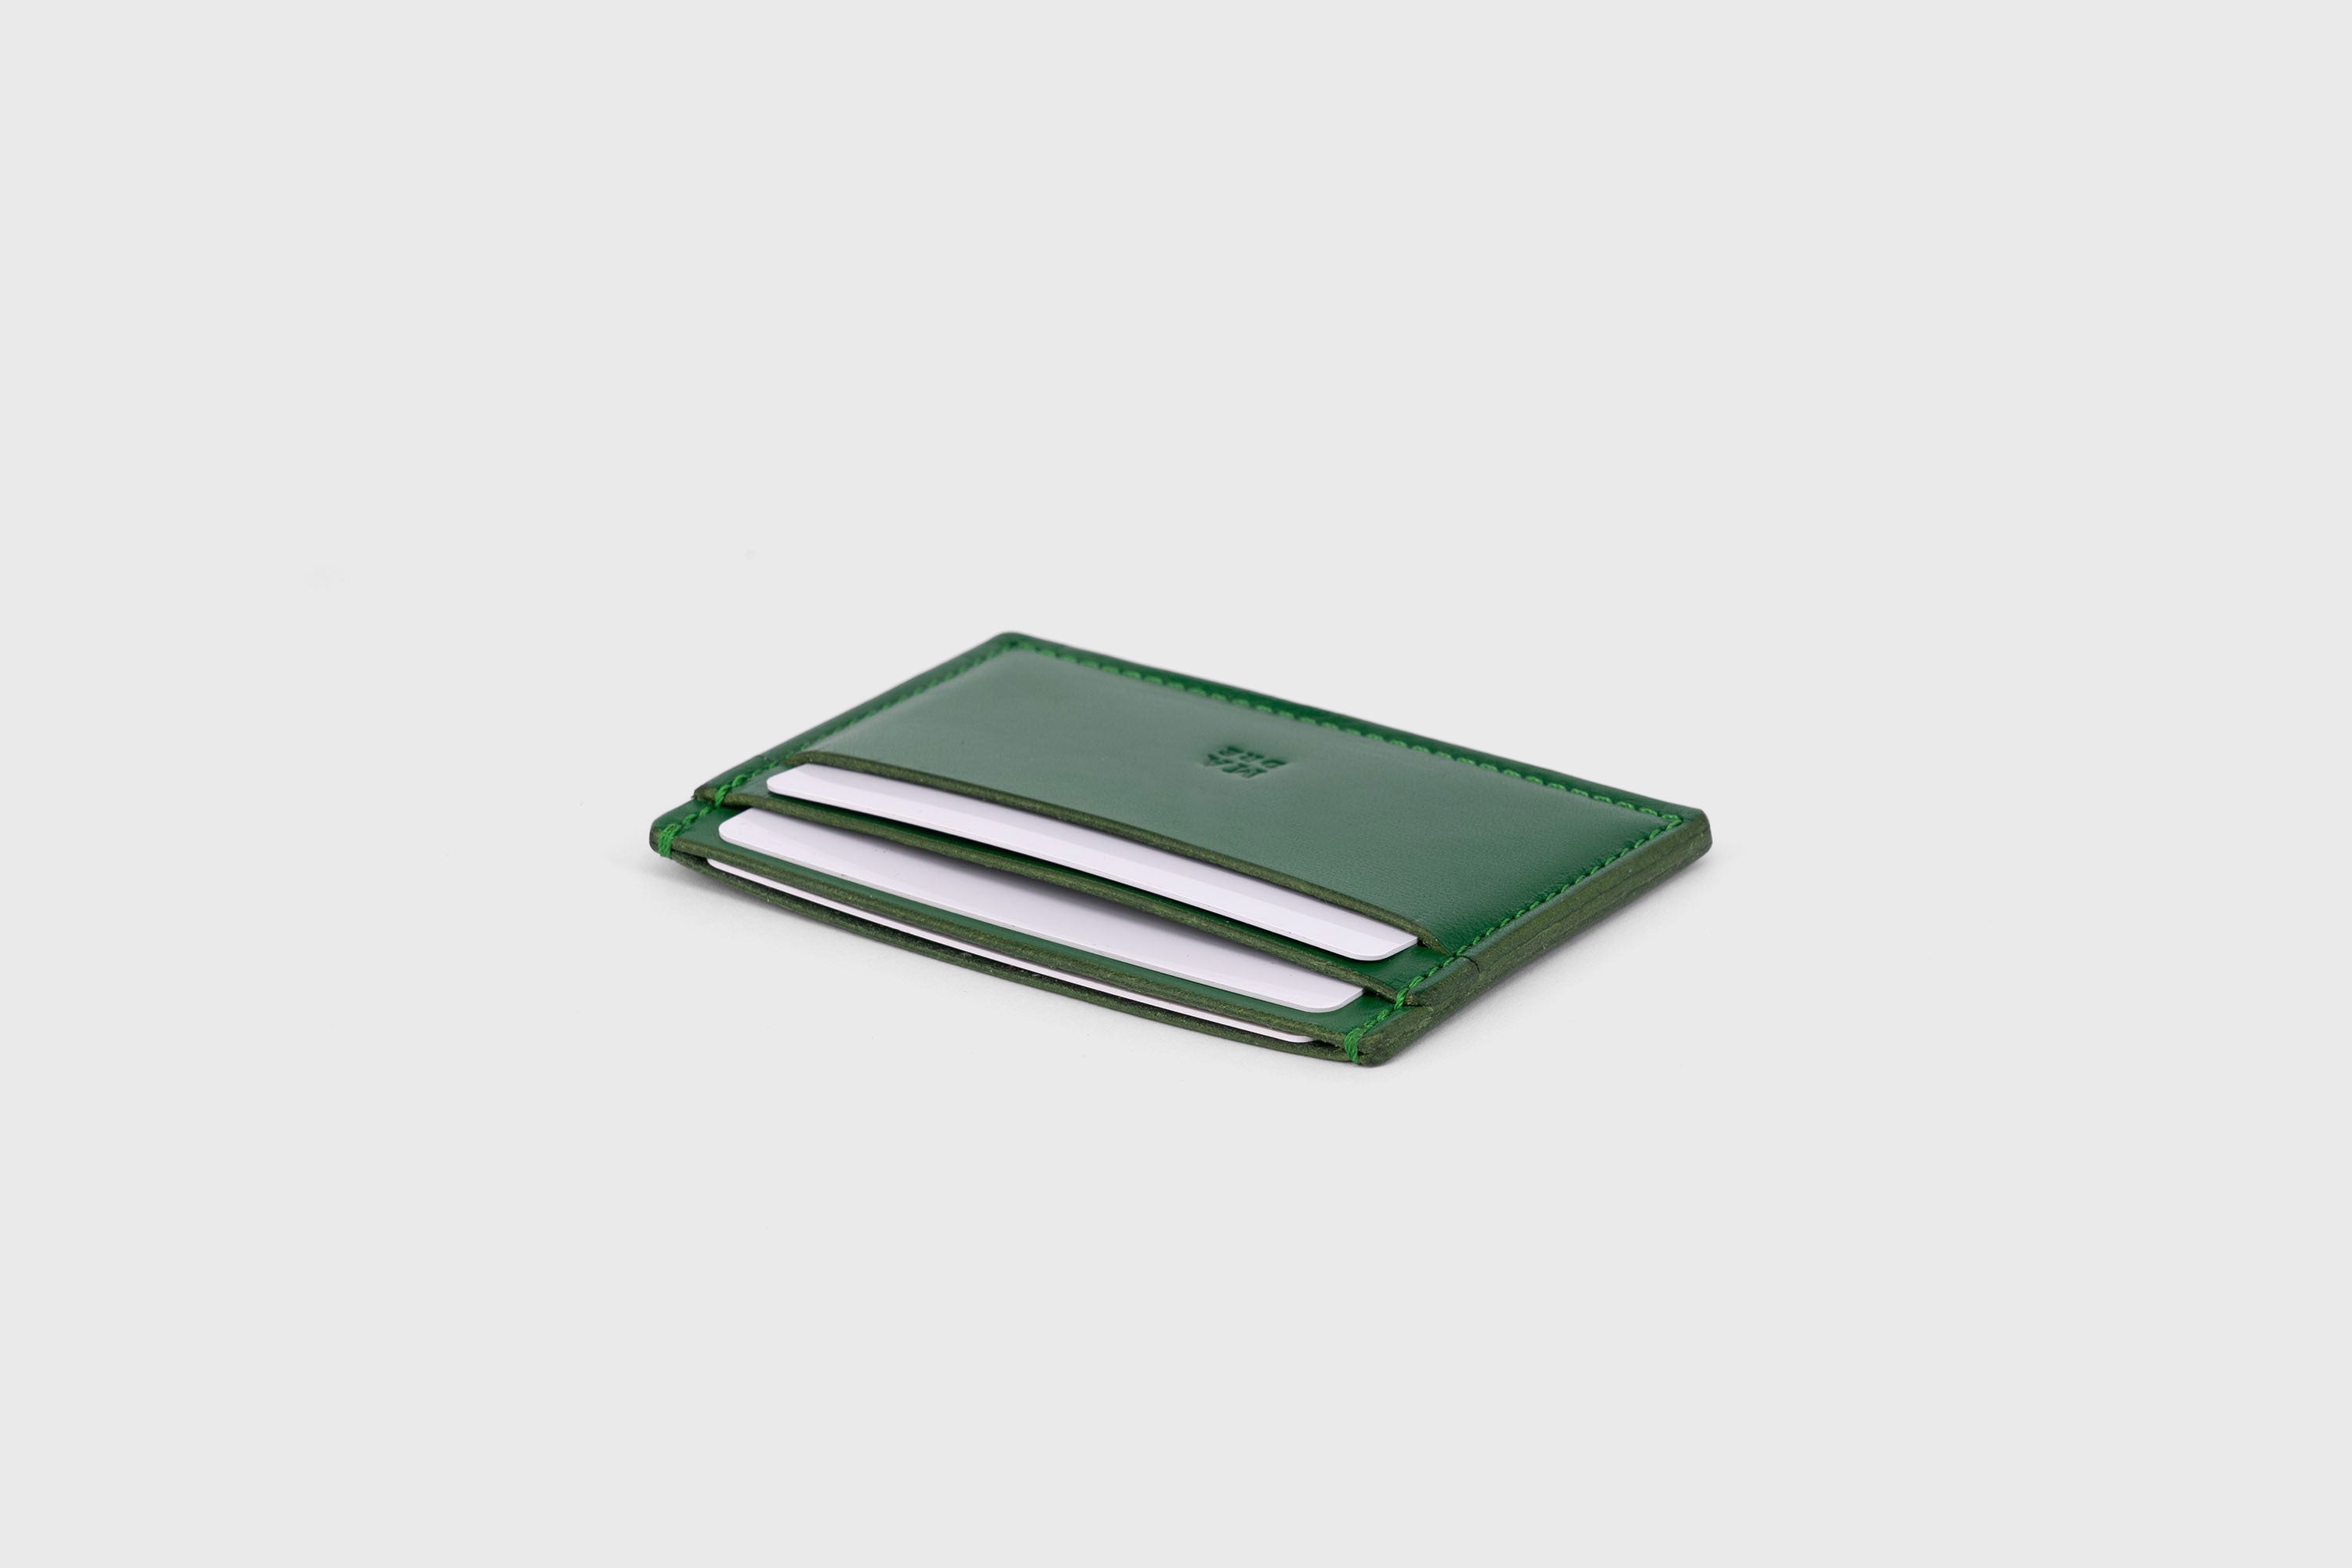 Credit Card Wallet in Grass Green Leather Vachetta Vegetable Tanned Leather Handmade and Designer Atelier Madre Manuel Dreesmann Barcelona Spain